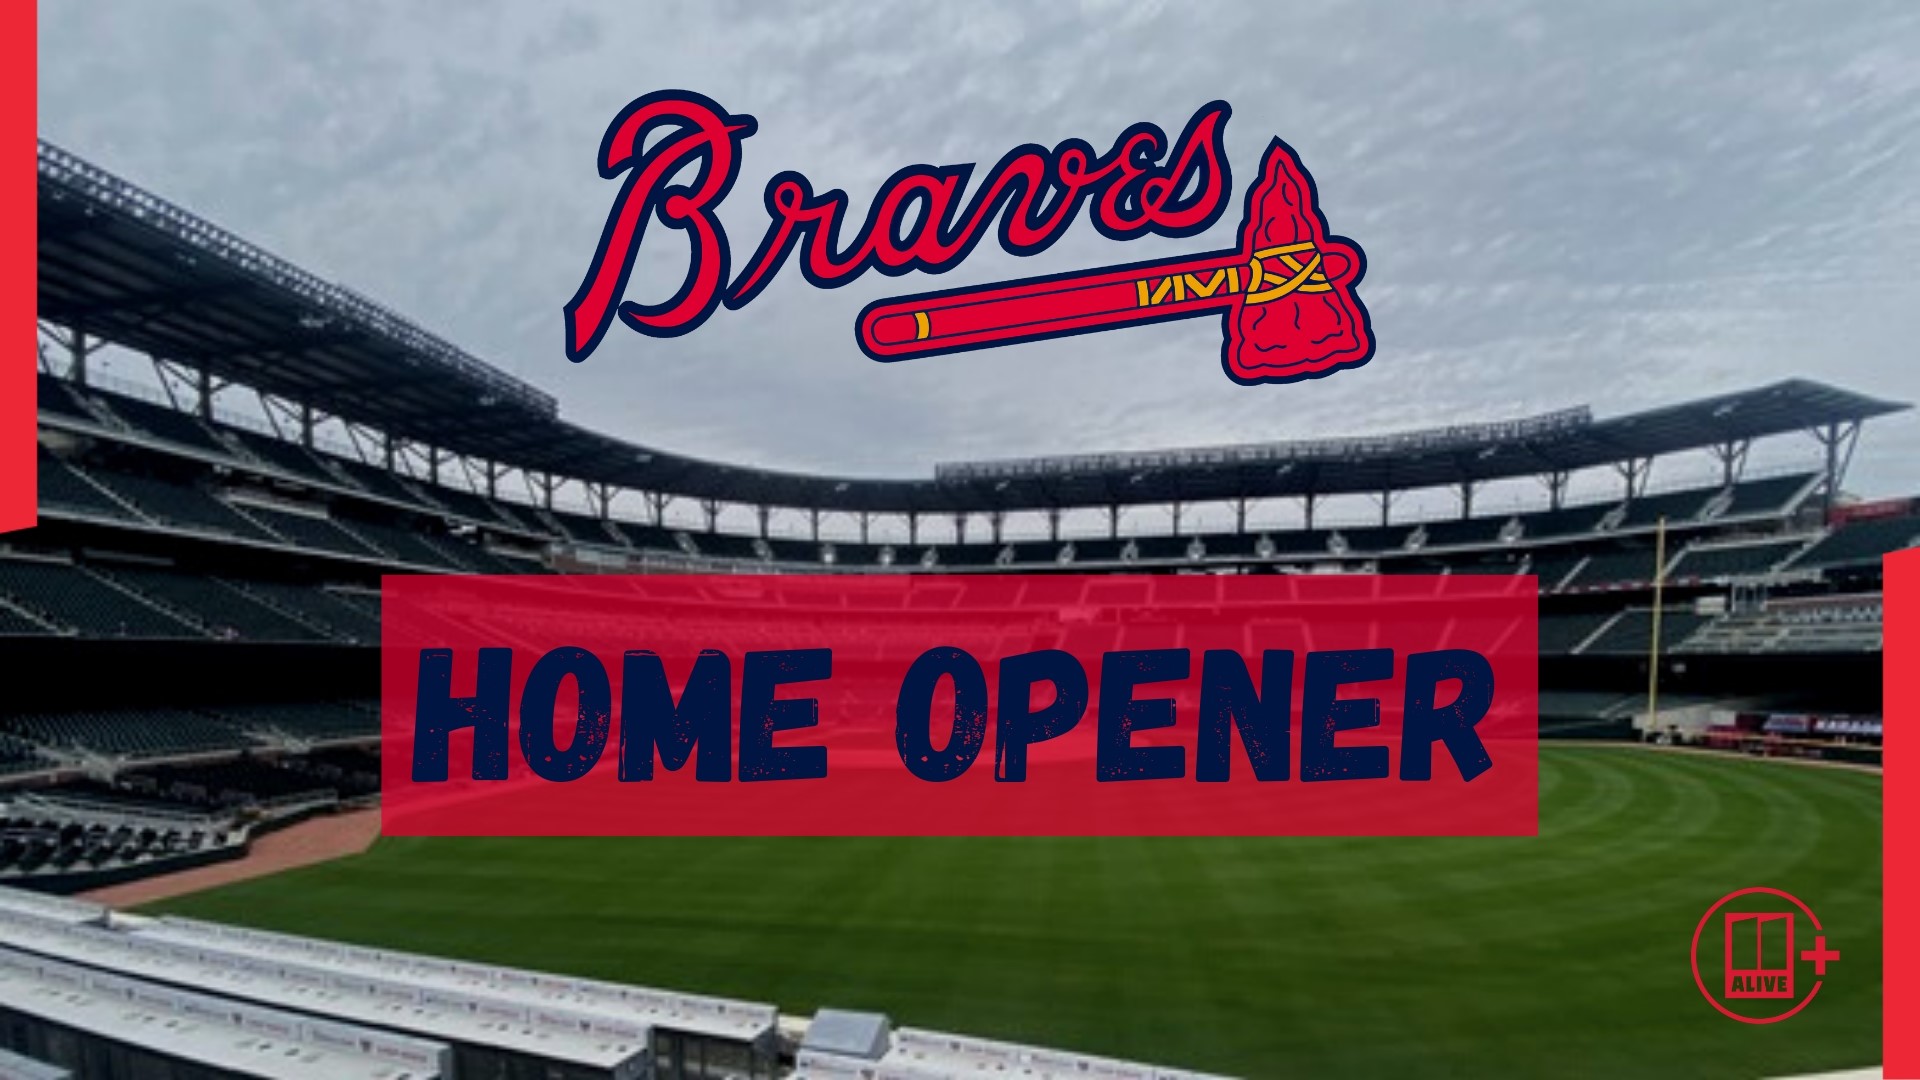 Braves home opener at Truist Park Everything for fans to know